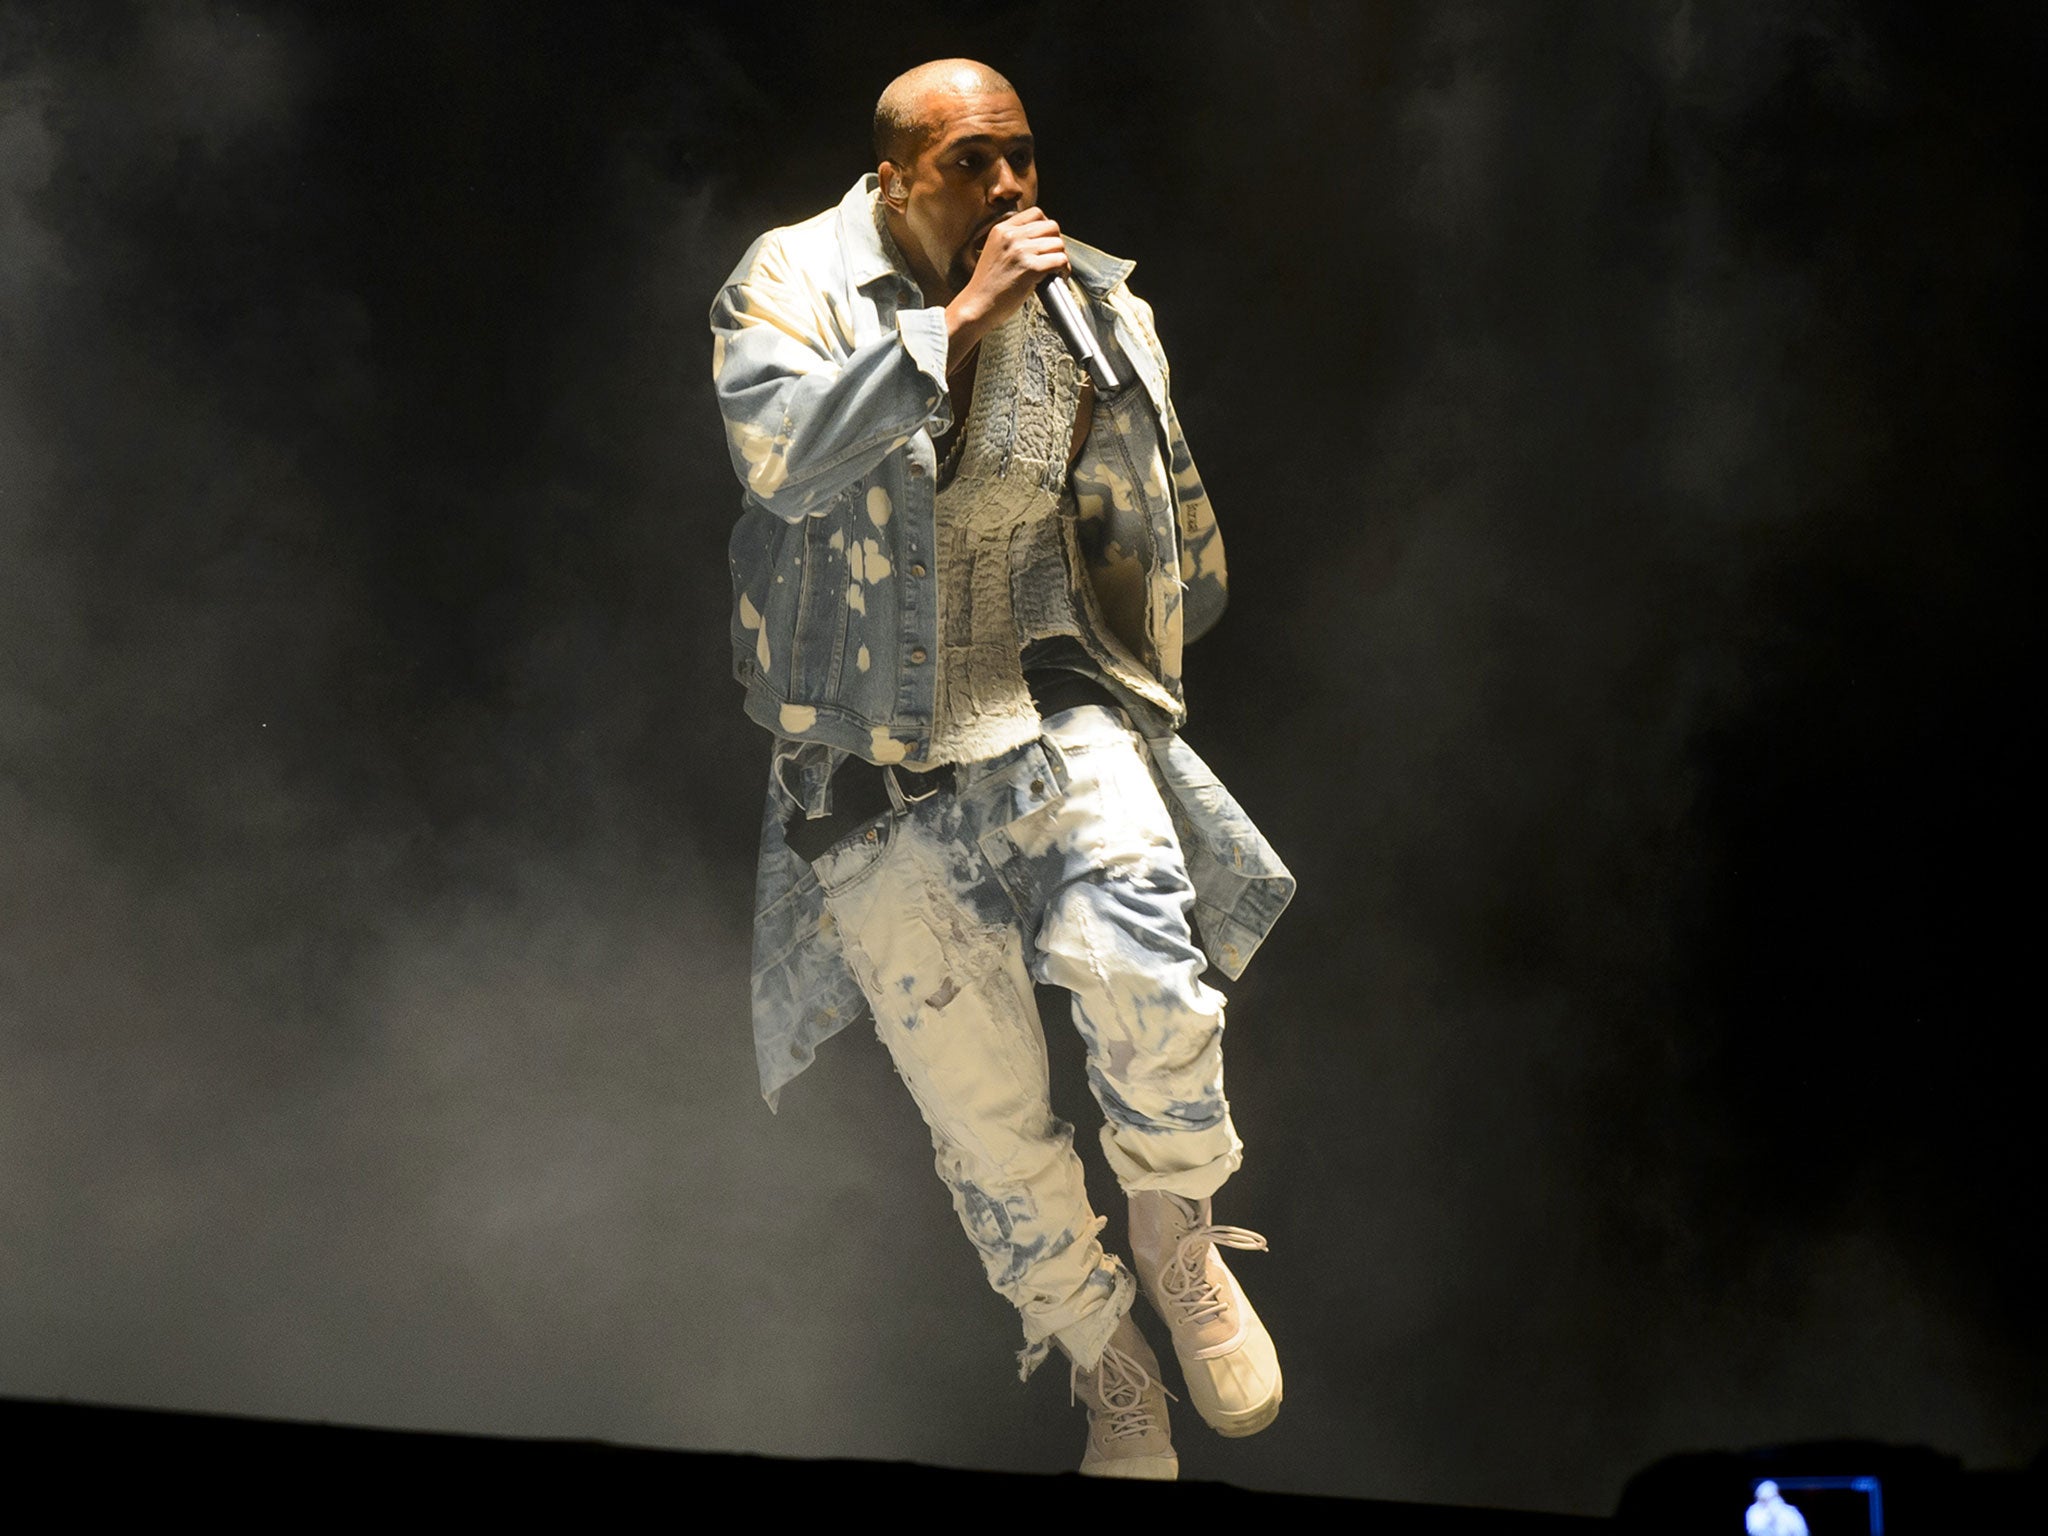 Kanye West storms the Pyramid Stage at Glastonbury